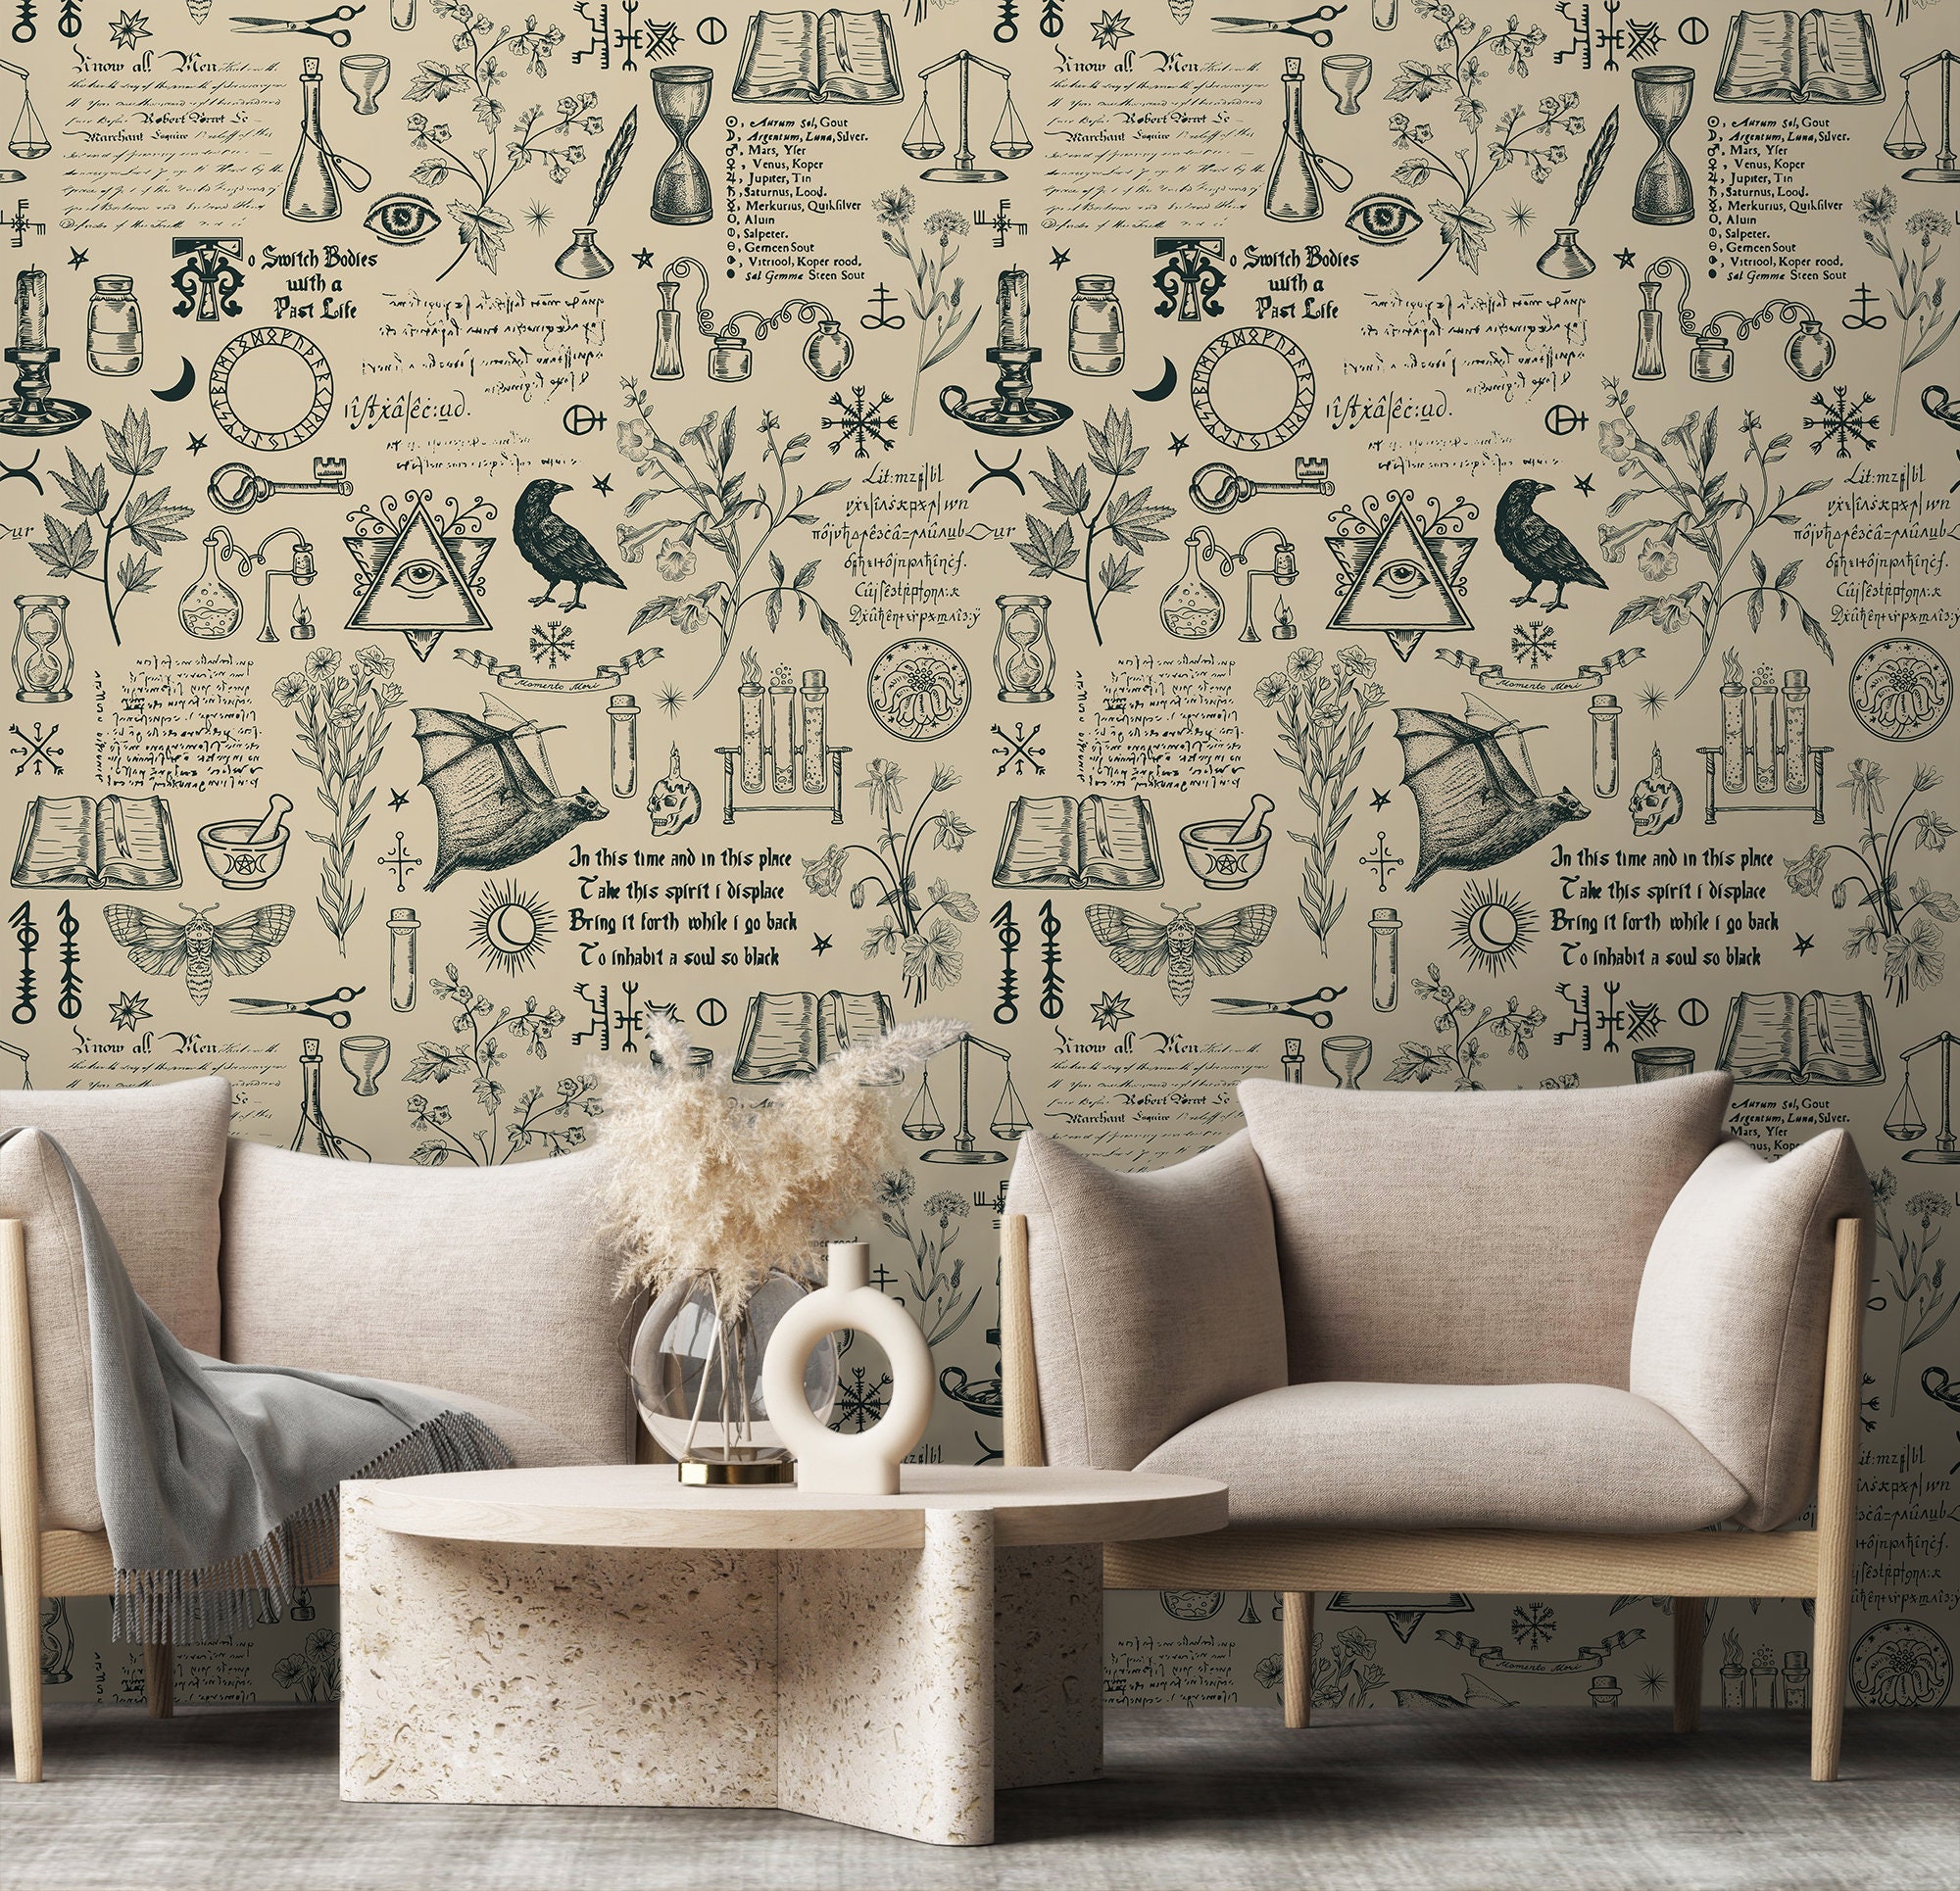 Beige Alchemy Motive Wallpaper With Ravens, Bats, Plants and Mystic Symbols  Self-adhesive, Removable, Peel and Stick Wall Mural 